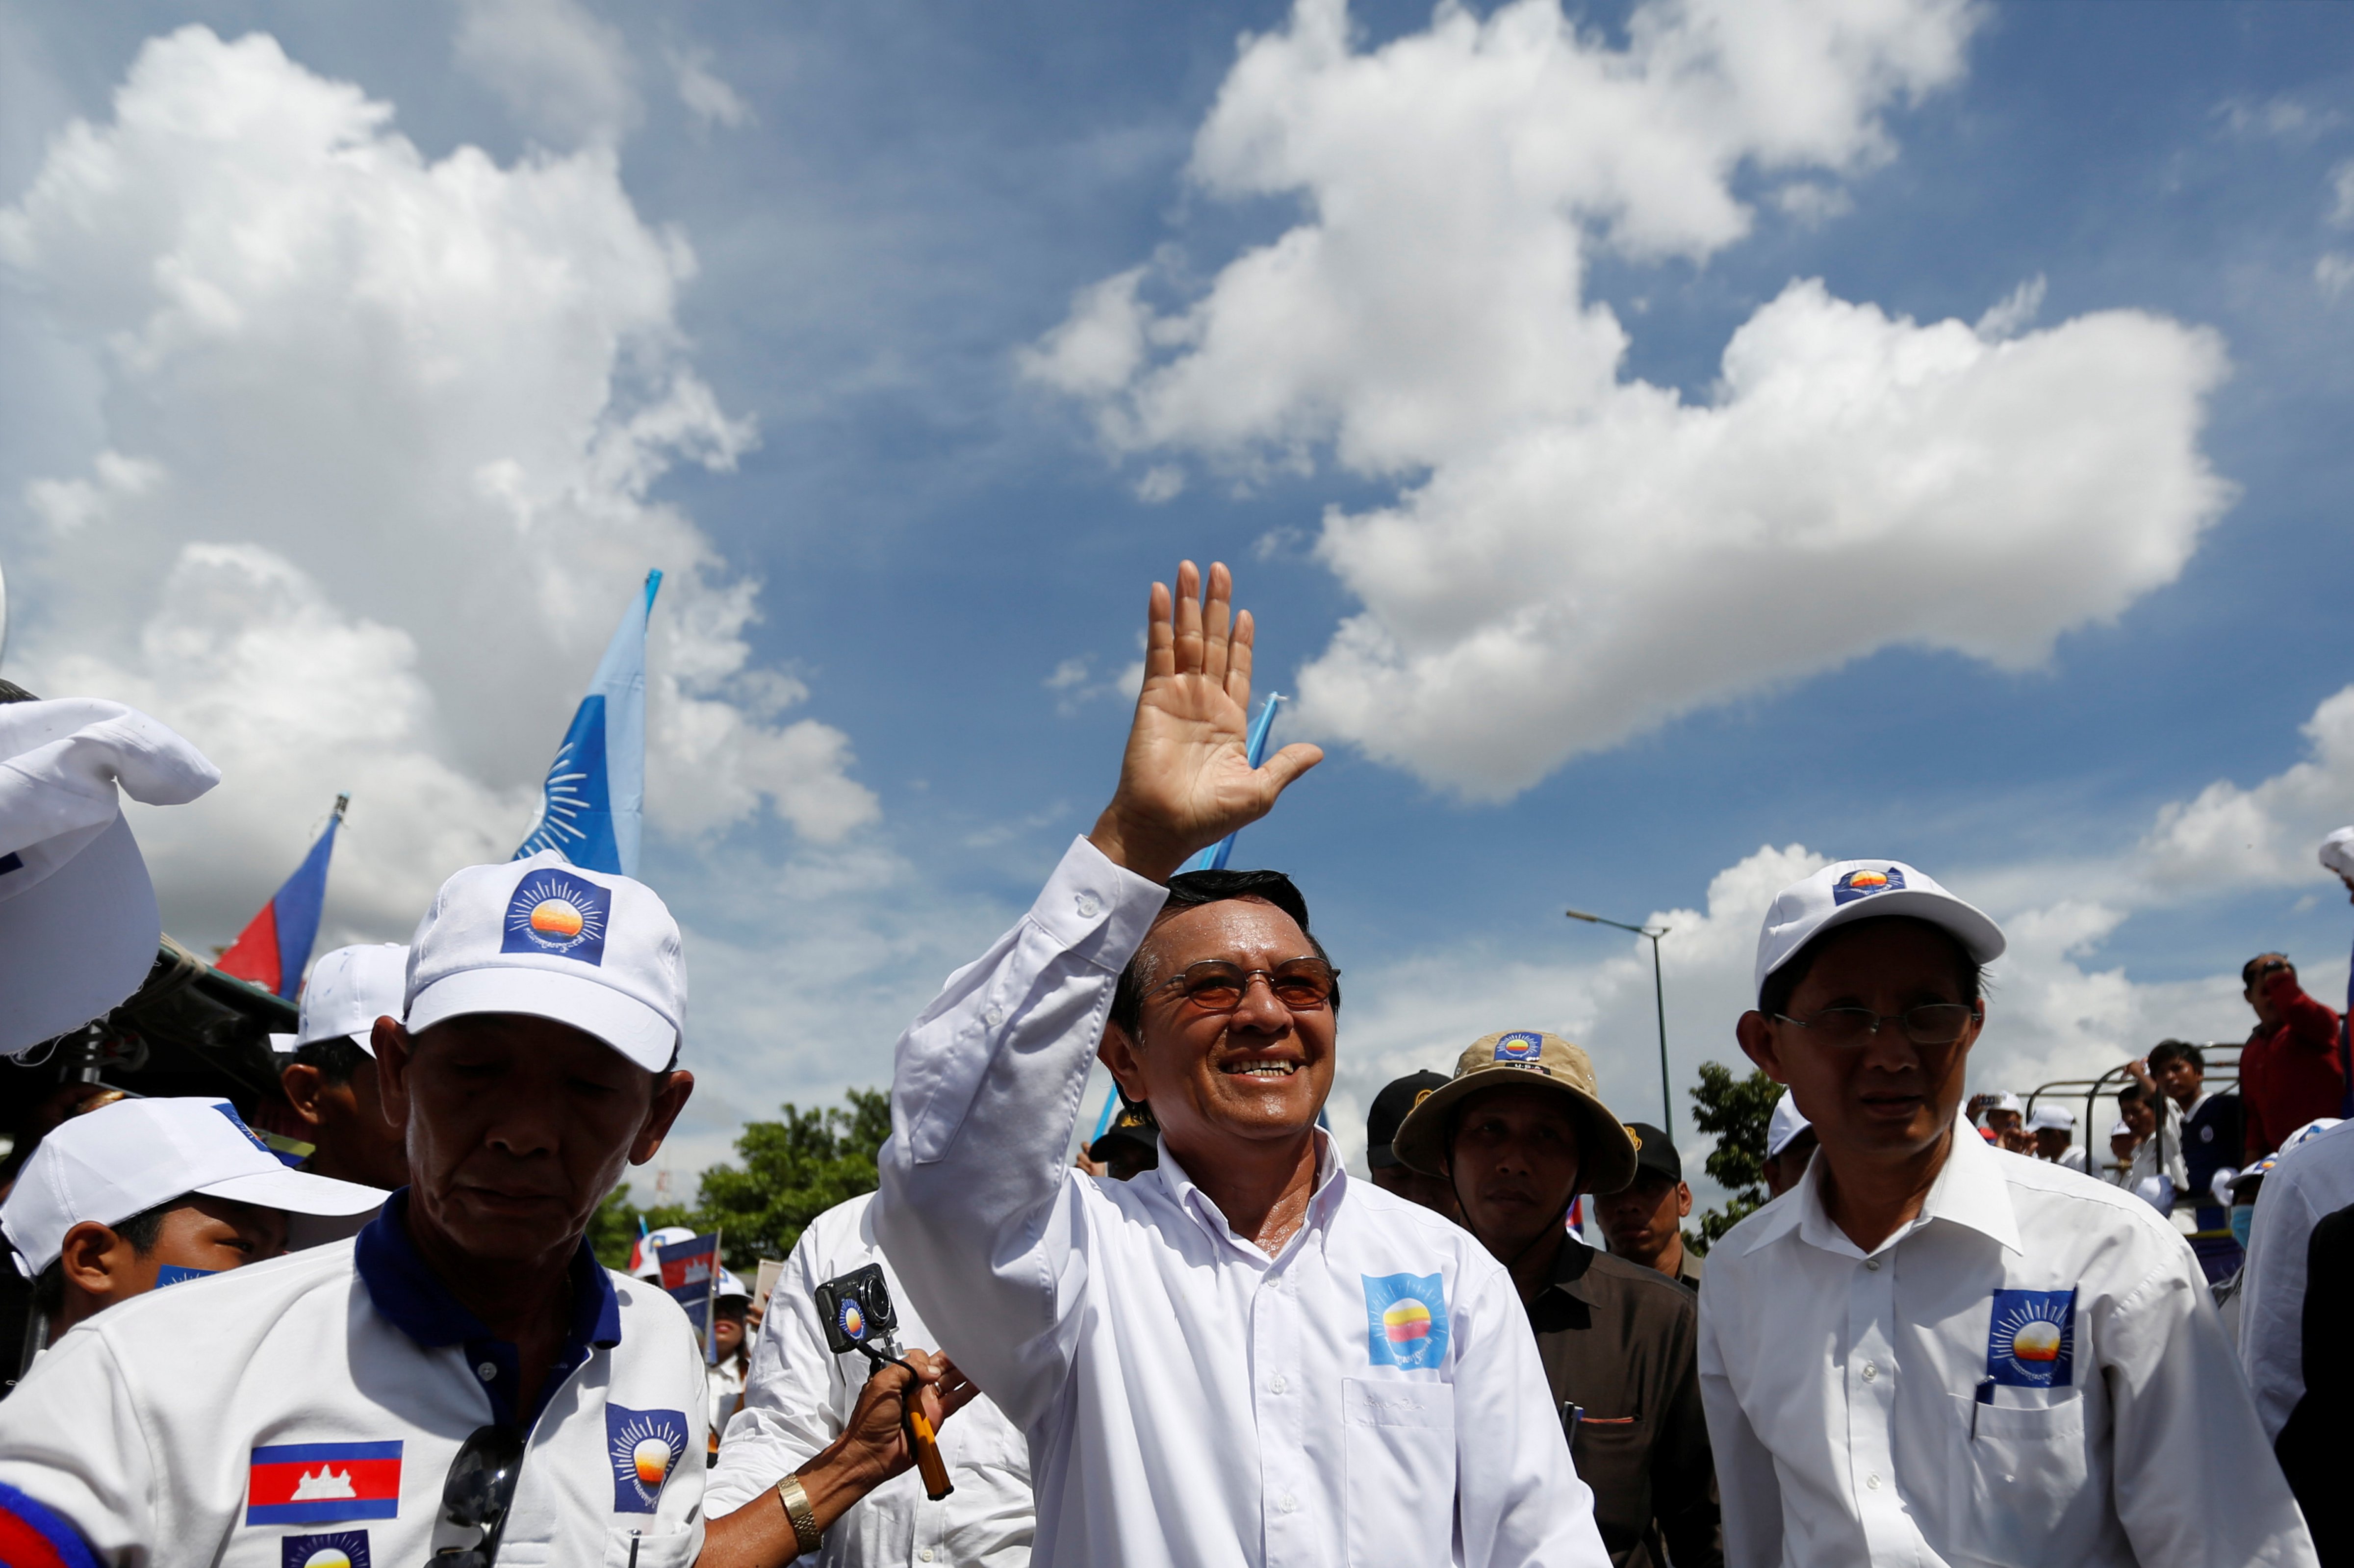 Kem Sokha, president of the opposition Cambodia National Rescue Party (CNRP), arrives at a campaign rally in Phnom Penh, Cambodia on June 2, 2017. (Pring Samrang—Reuters)